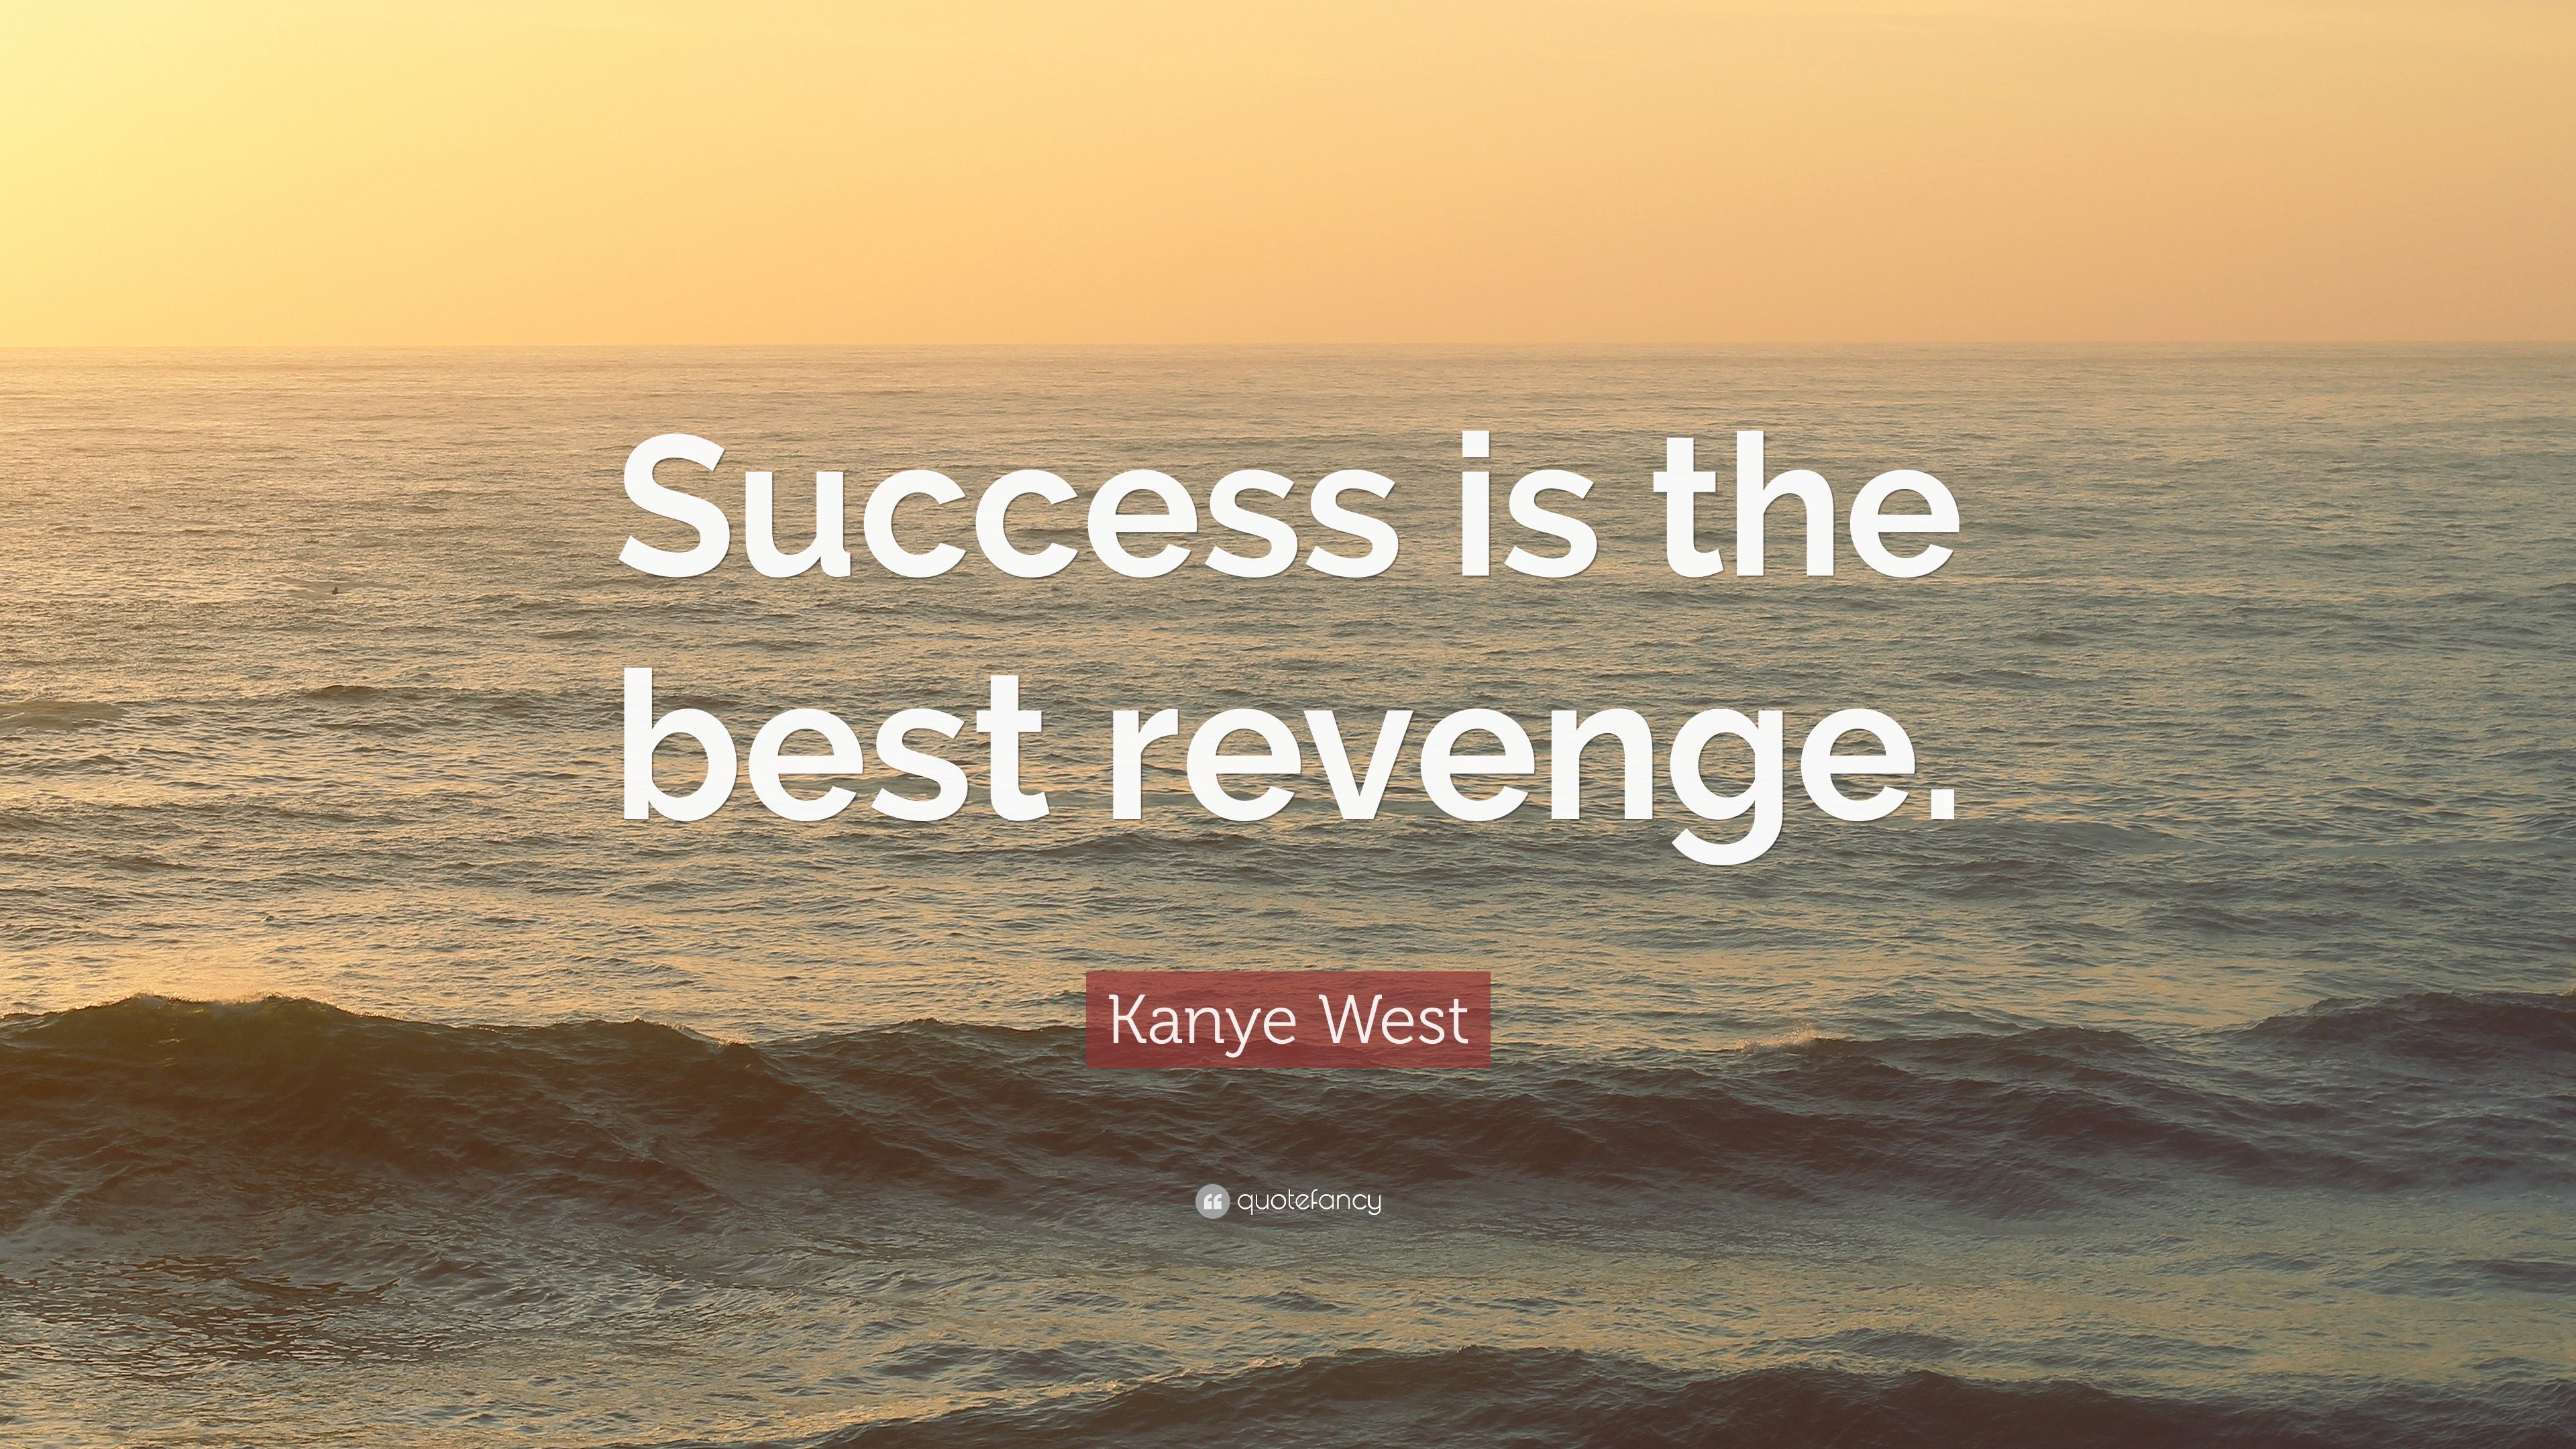 Kanye West Quote: “Success is the best revenge.” 12 wallpaper